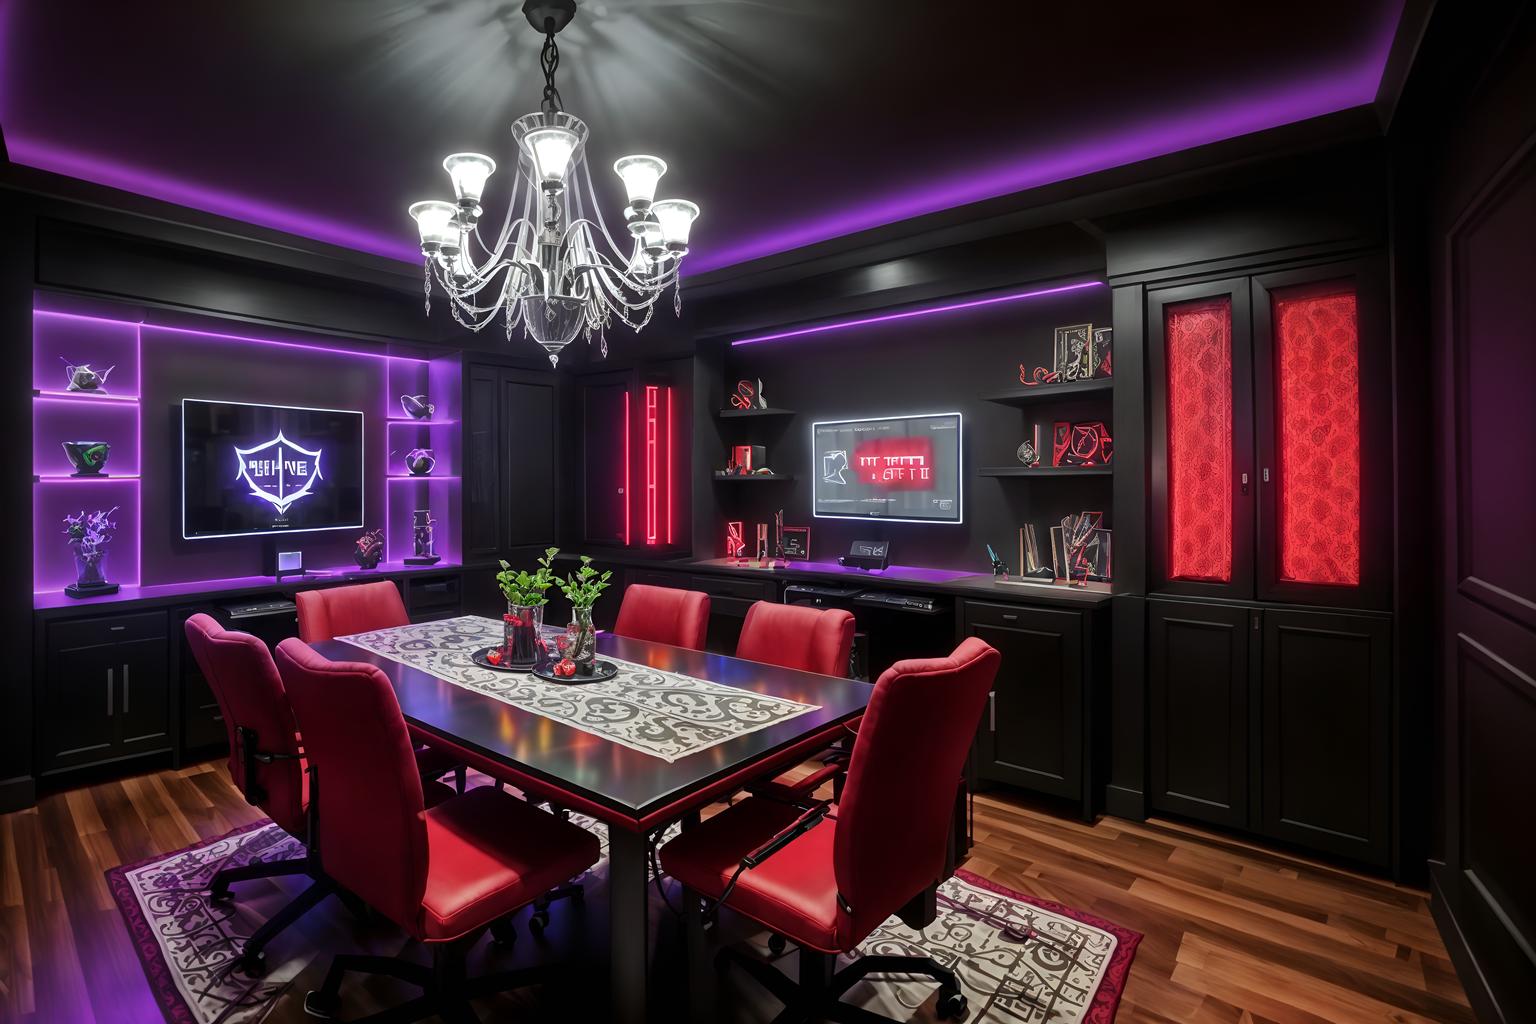 gaming room-style (dining room interior) with table cloth and vase and plates, cutlery and glasses on dining table and bookshelves and light or chandelier and dining table and plant and dining table chairs. . with purple and red lights and speakers and gaming chair and multiple displays and dark walls and at night and computer desk with computer displays and keyboard and purple, red and blue fade light. . cinematic photo, highly detailed, cinematic lighting, ultra-detailed, ultrarealistic, photorealism, 8k. gaming room interior design style. masterpiece, cinematic light, ultrarealistic+, photorealistic+, 8k, raw photo, realistic, sharp focus on eyes, (symmetrical eyes), (intact eyes), hyperrealistic, highest quality, best quality, , highly detailed, masterpiece, best quality, extremely detailed 8k wallpaper, masterpiece, best quality, ultra-detailed, best shadow, detailed background, detailed face, detailed eyes, high contrast, best illumination, detailed face, dulux, caustic, dynamic angle, detailed glow. dramatic lighting. highly detailed, insanely detailed hair, symmetrical, intricate details, professionally retouched, 8k high definition. strong bokeh. award winning photo.